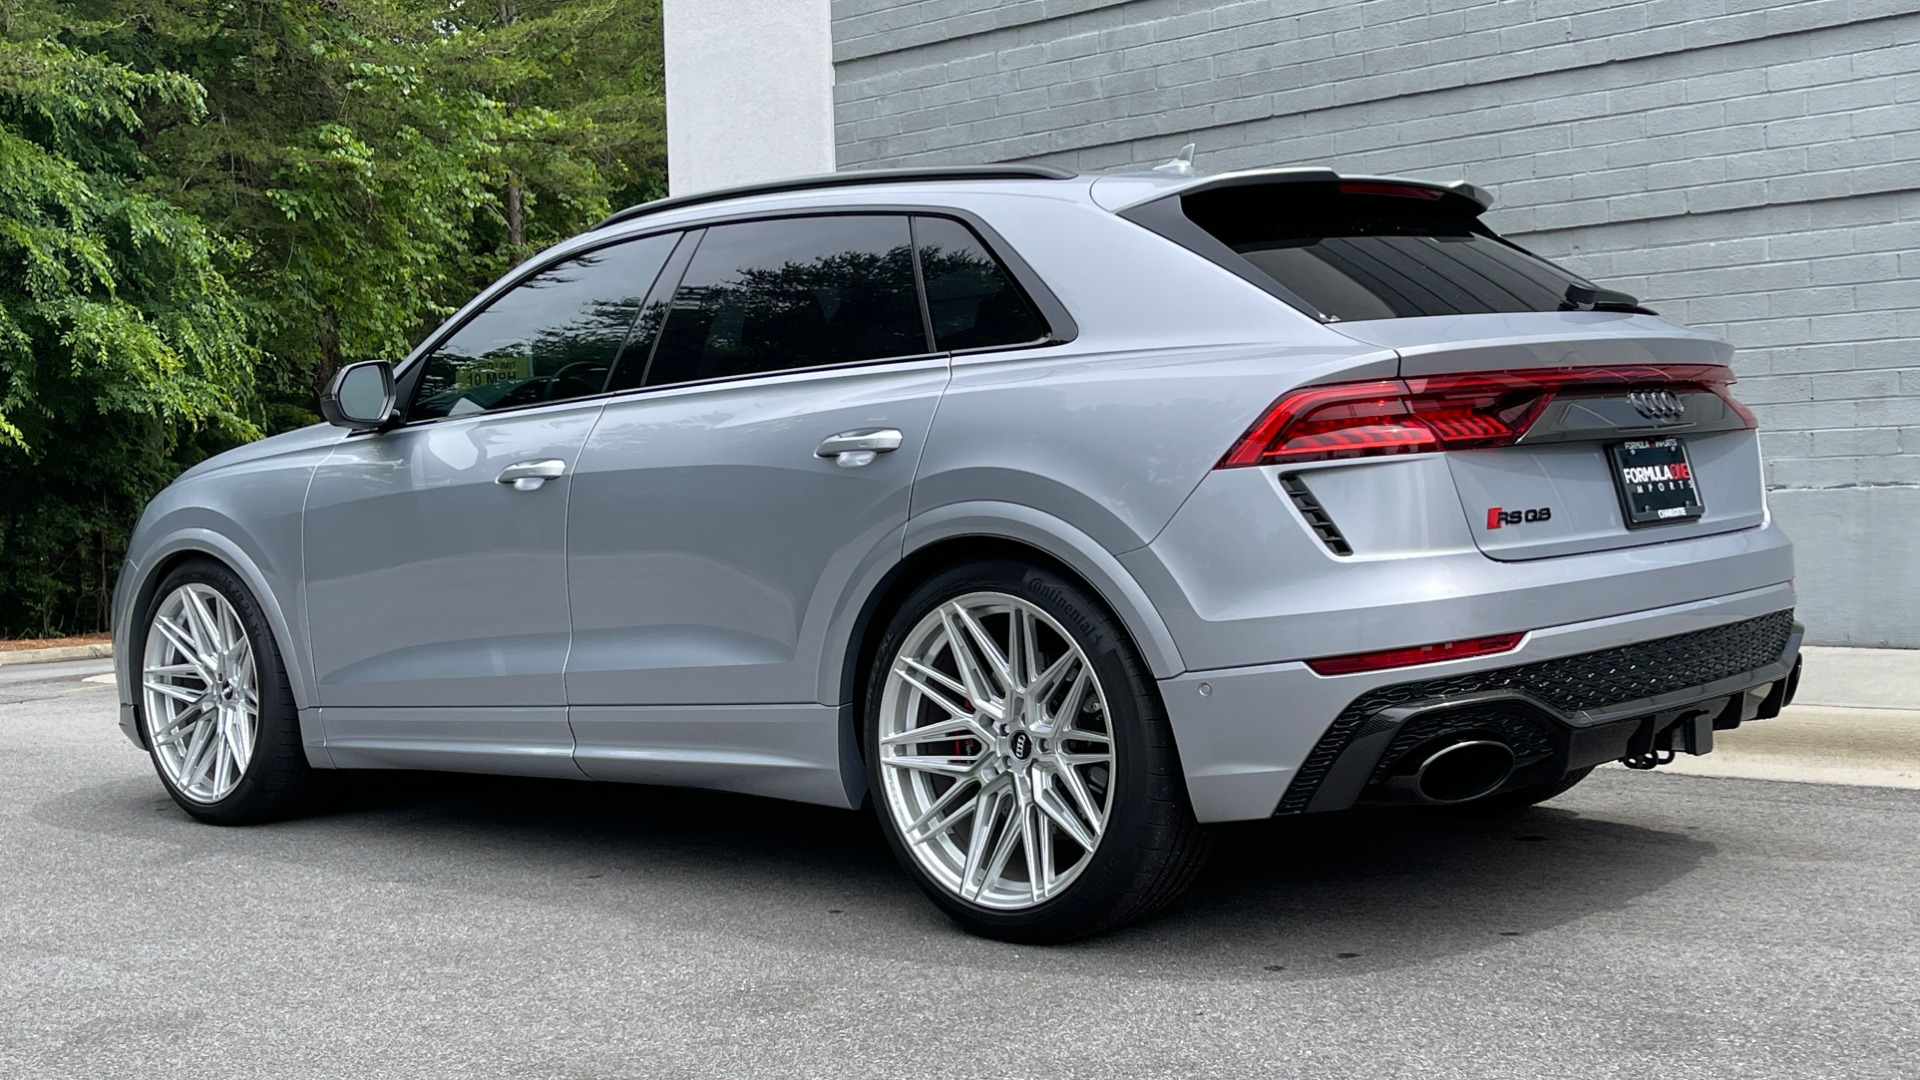 Used 2021 Audi RS Q8 4.0 TFSA QUATTRO / LUX / EXEC / CARBON & BLACK OPTIC / DRVR ASST / TOWING for sale $139,999 at Formula Imports in Charlotte NC 28227 7